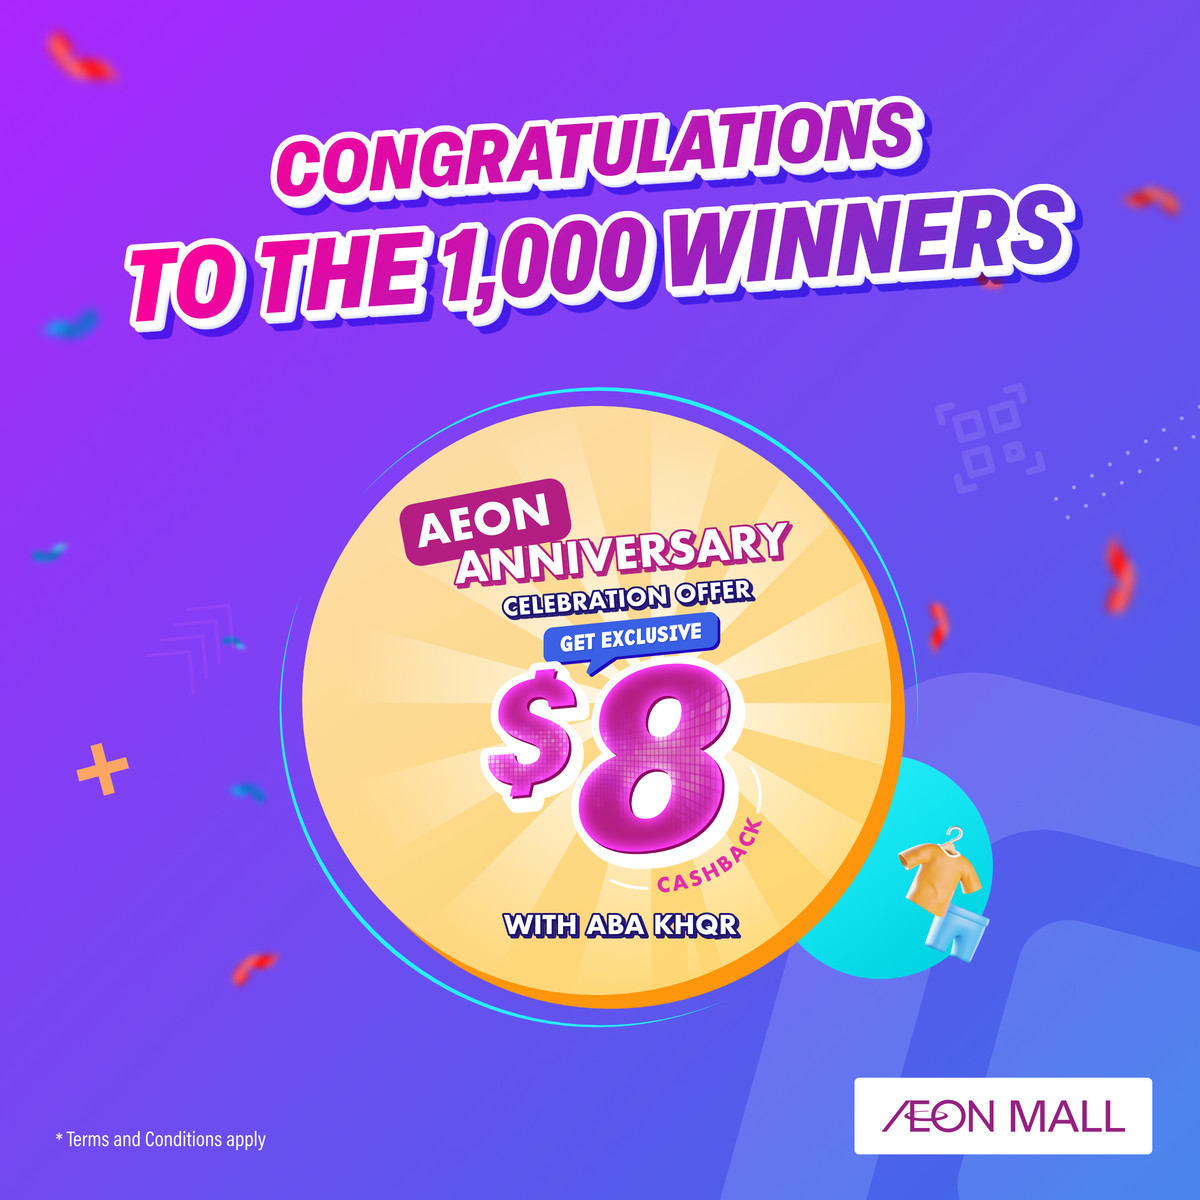 Congratulations​ to​ the​ winners​ of​ ‘Get​ $8​ cashback​ at​ AEON​ with​ ABA​ KHQR’​ promotion